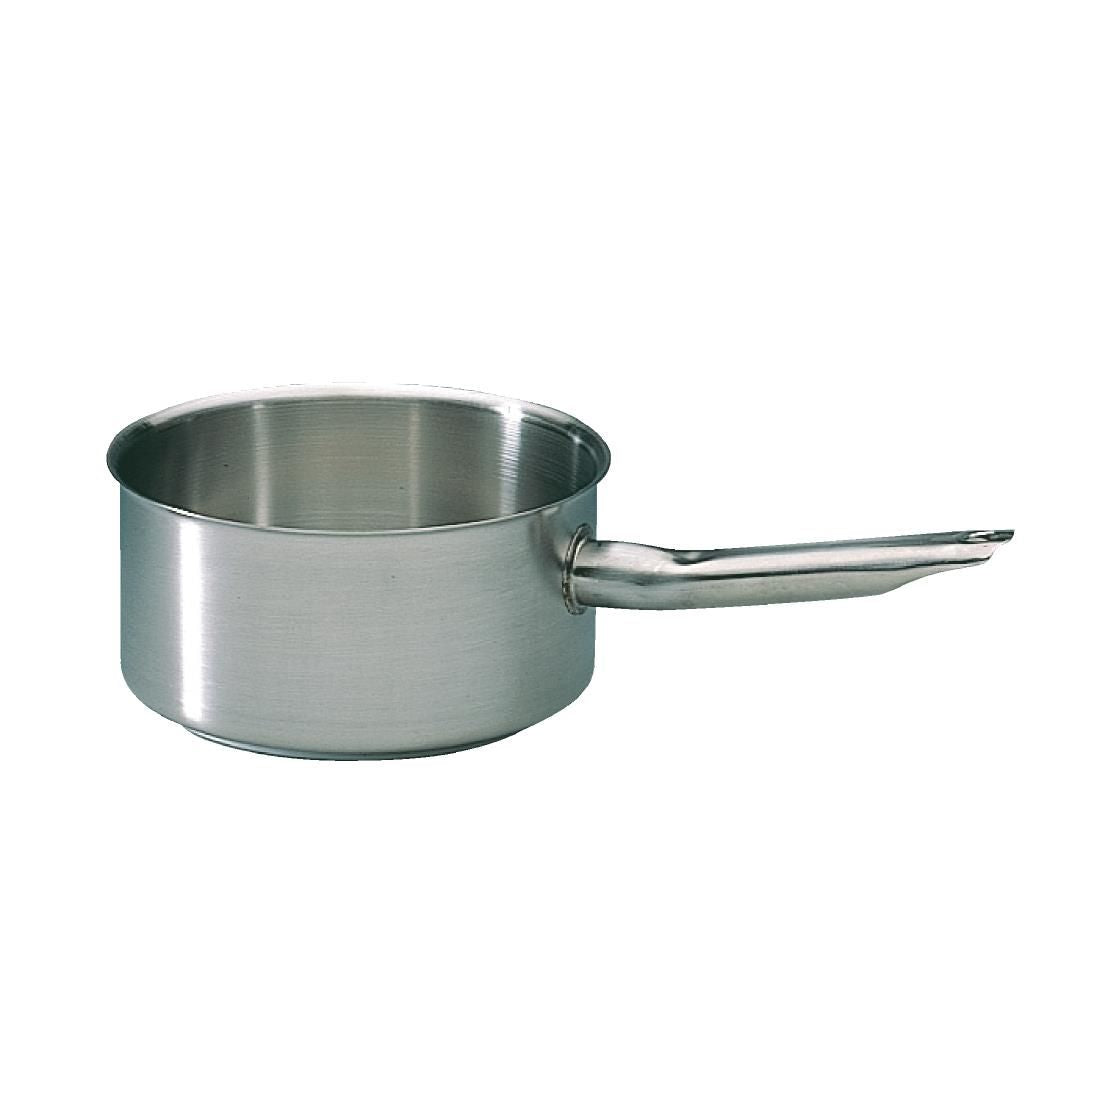 Bourgeat Stainless Steel Excellence Saucepan 1Ltr JD Catering Equipment Solutions Ltd